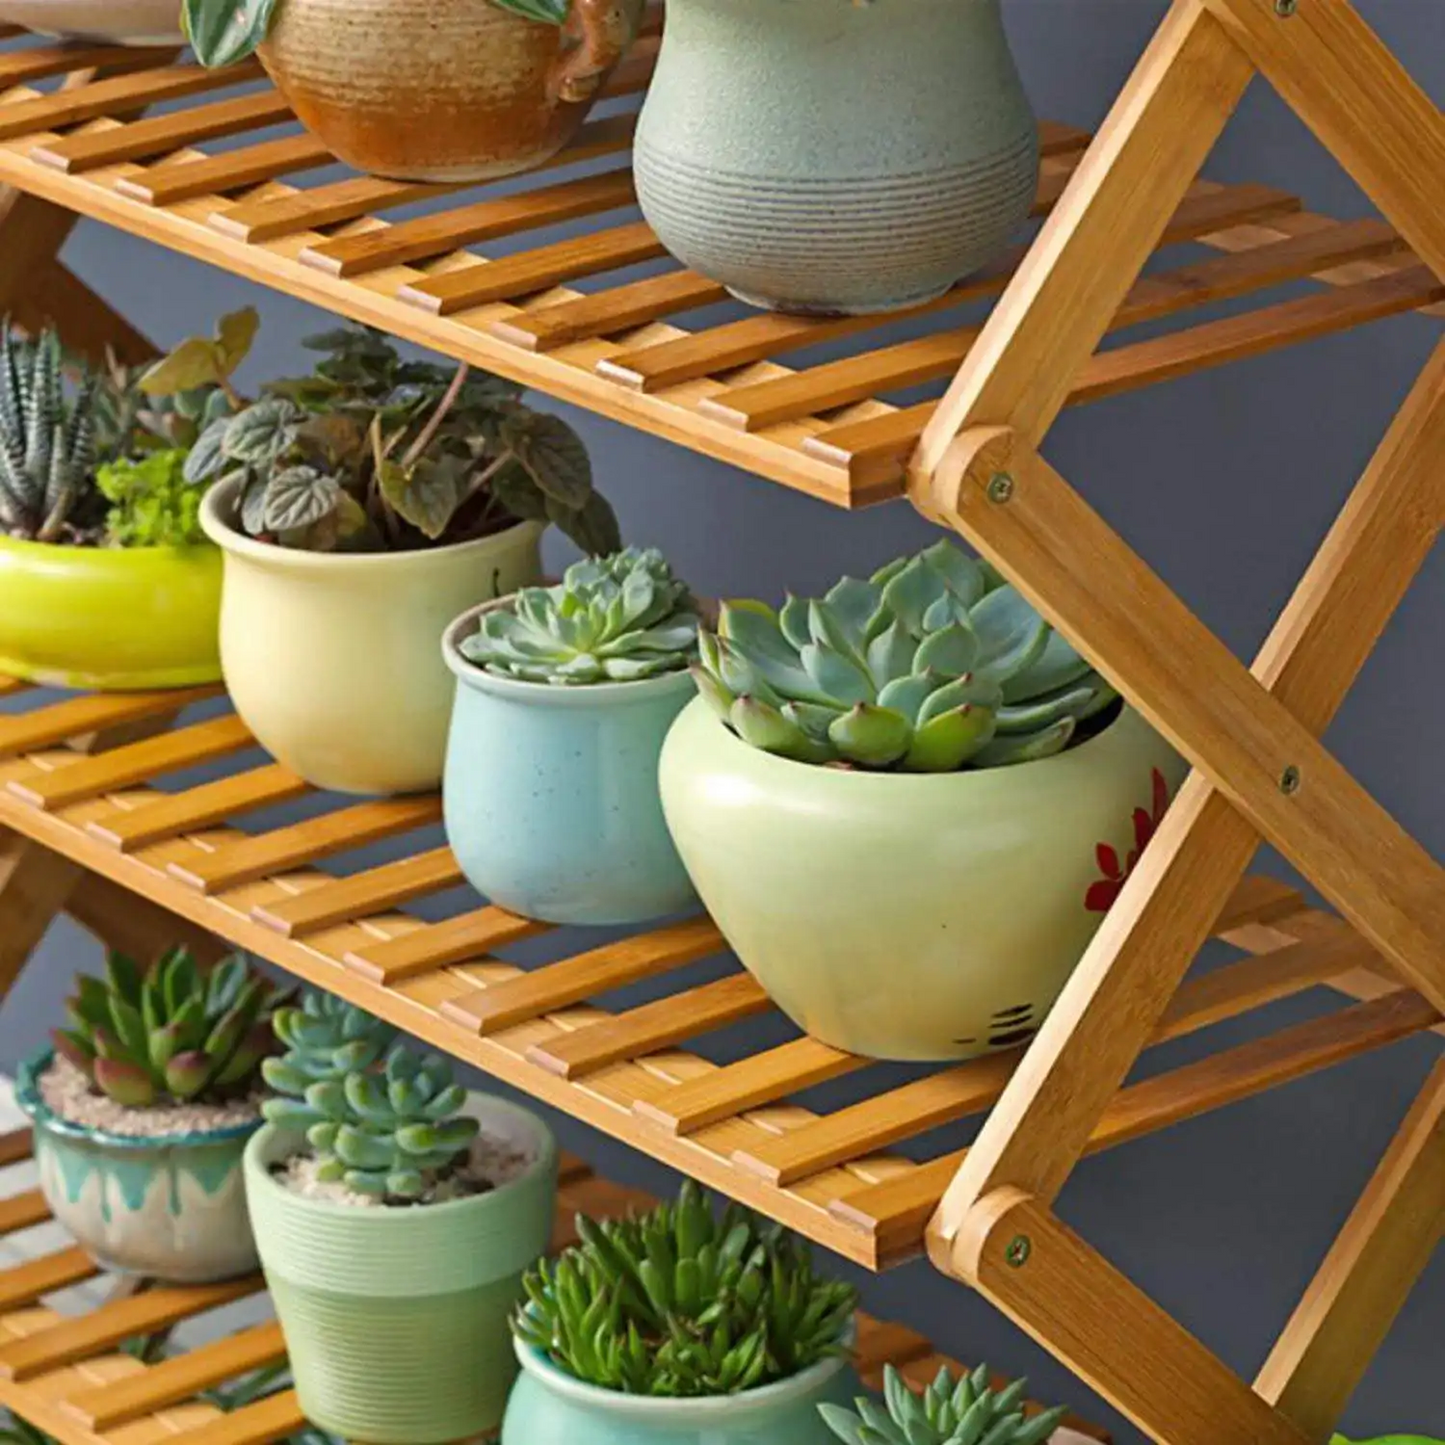 5 Tier Bamboo  Foldable Plant Stand